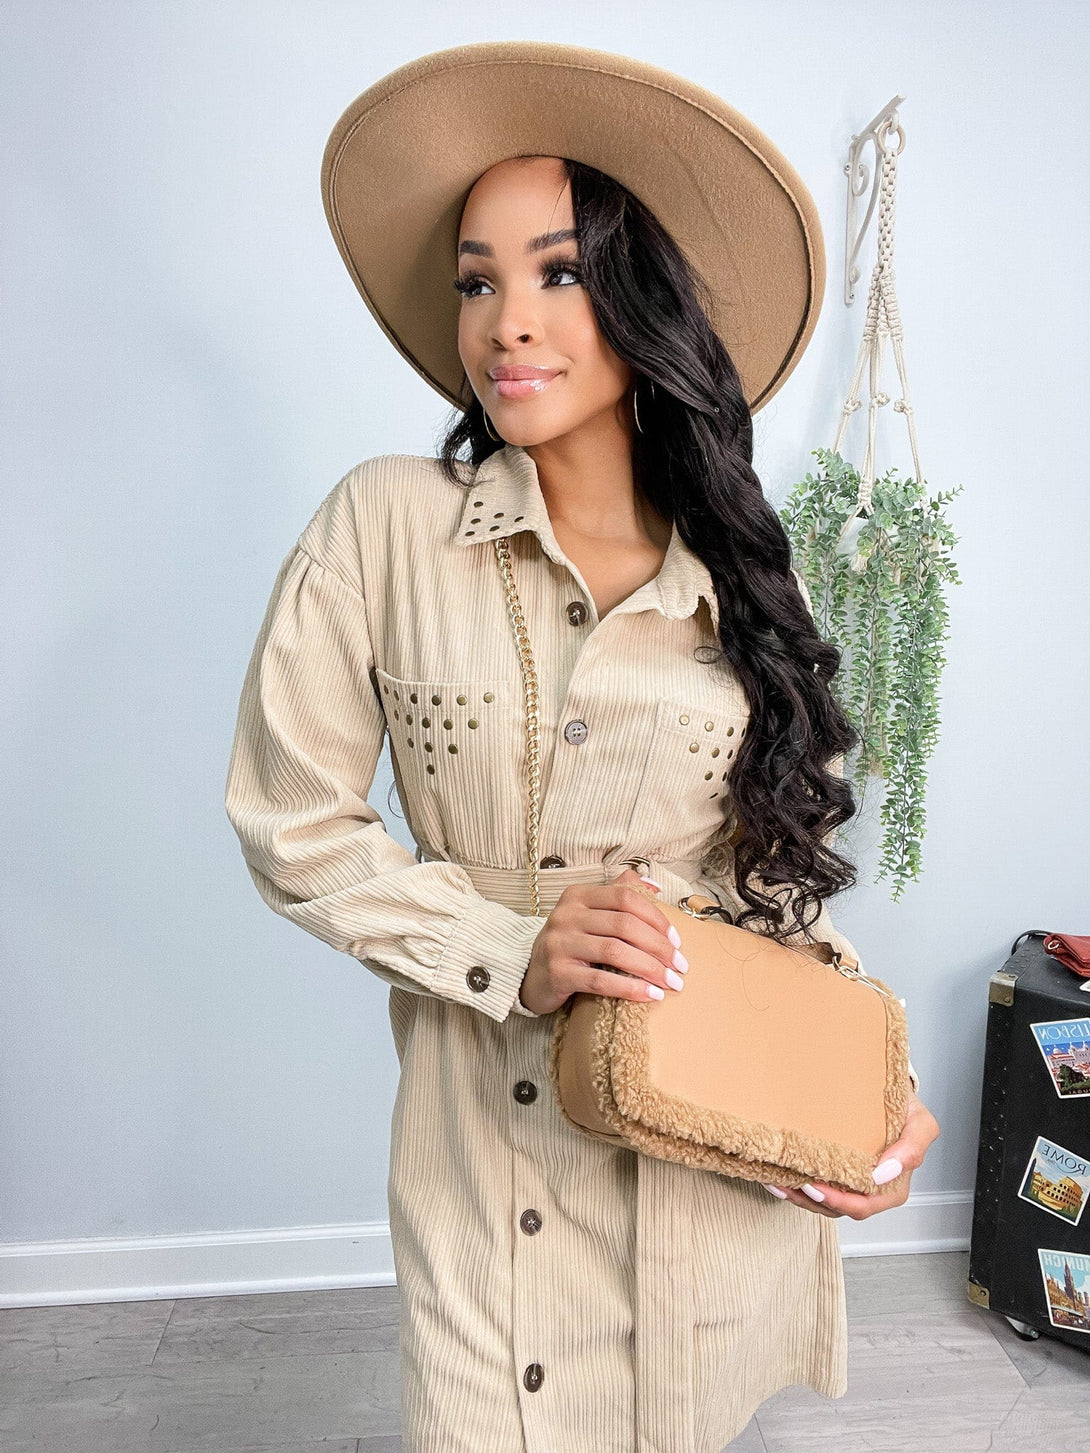 Corduroy Belted Stud Detail Collar And Pocket Button Down Shirt Dress